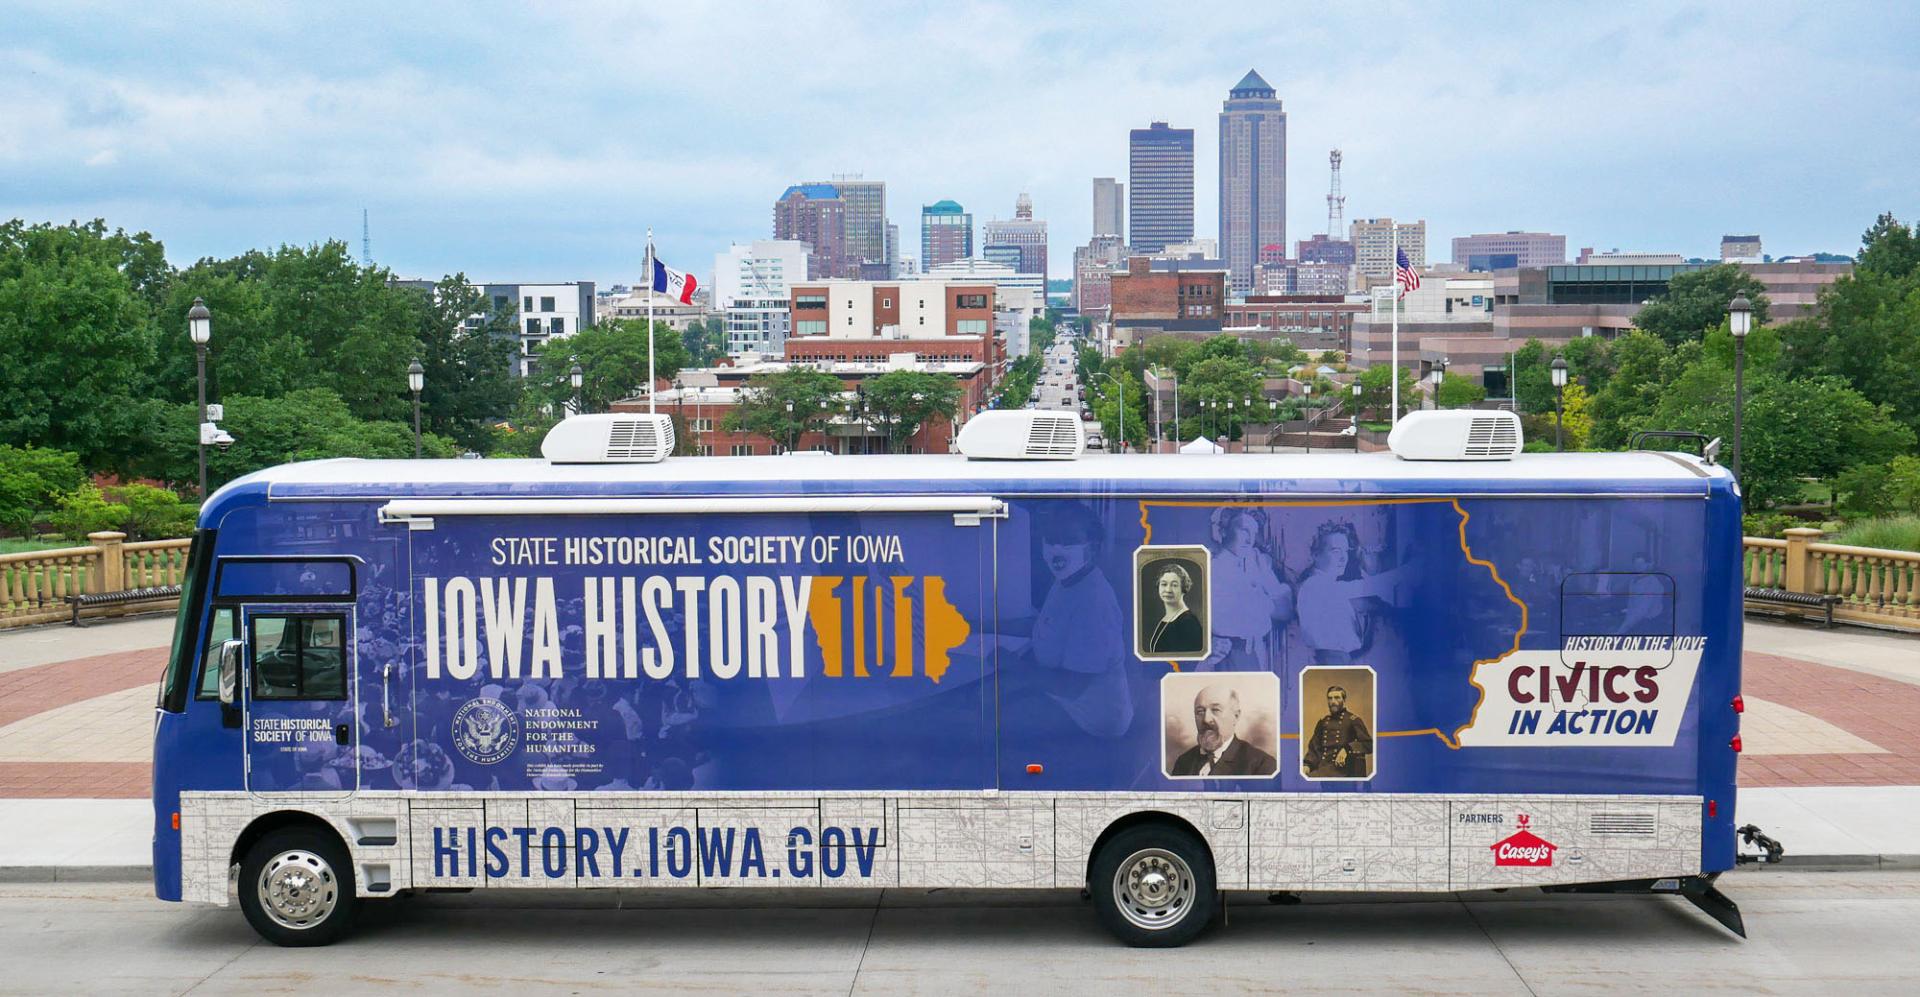 The Mobile Museum 3.0 is parked in front of a view of downtown Des Moines